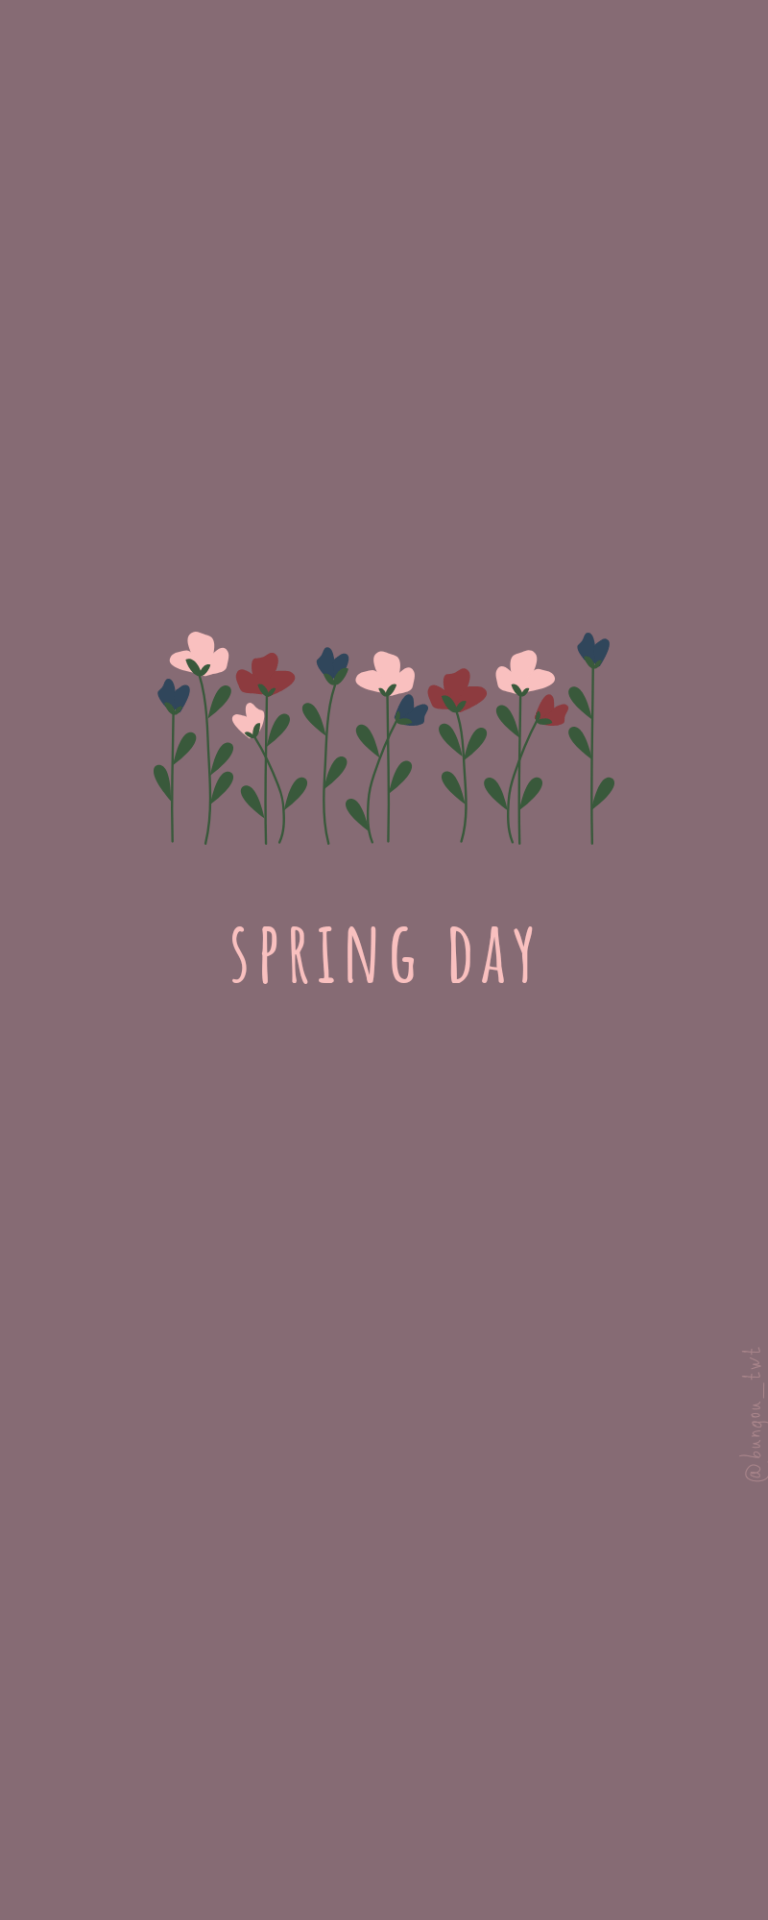 Spring day wallpaper for your phone! - Simple